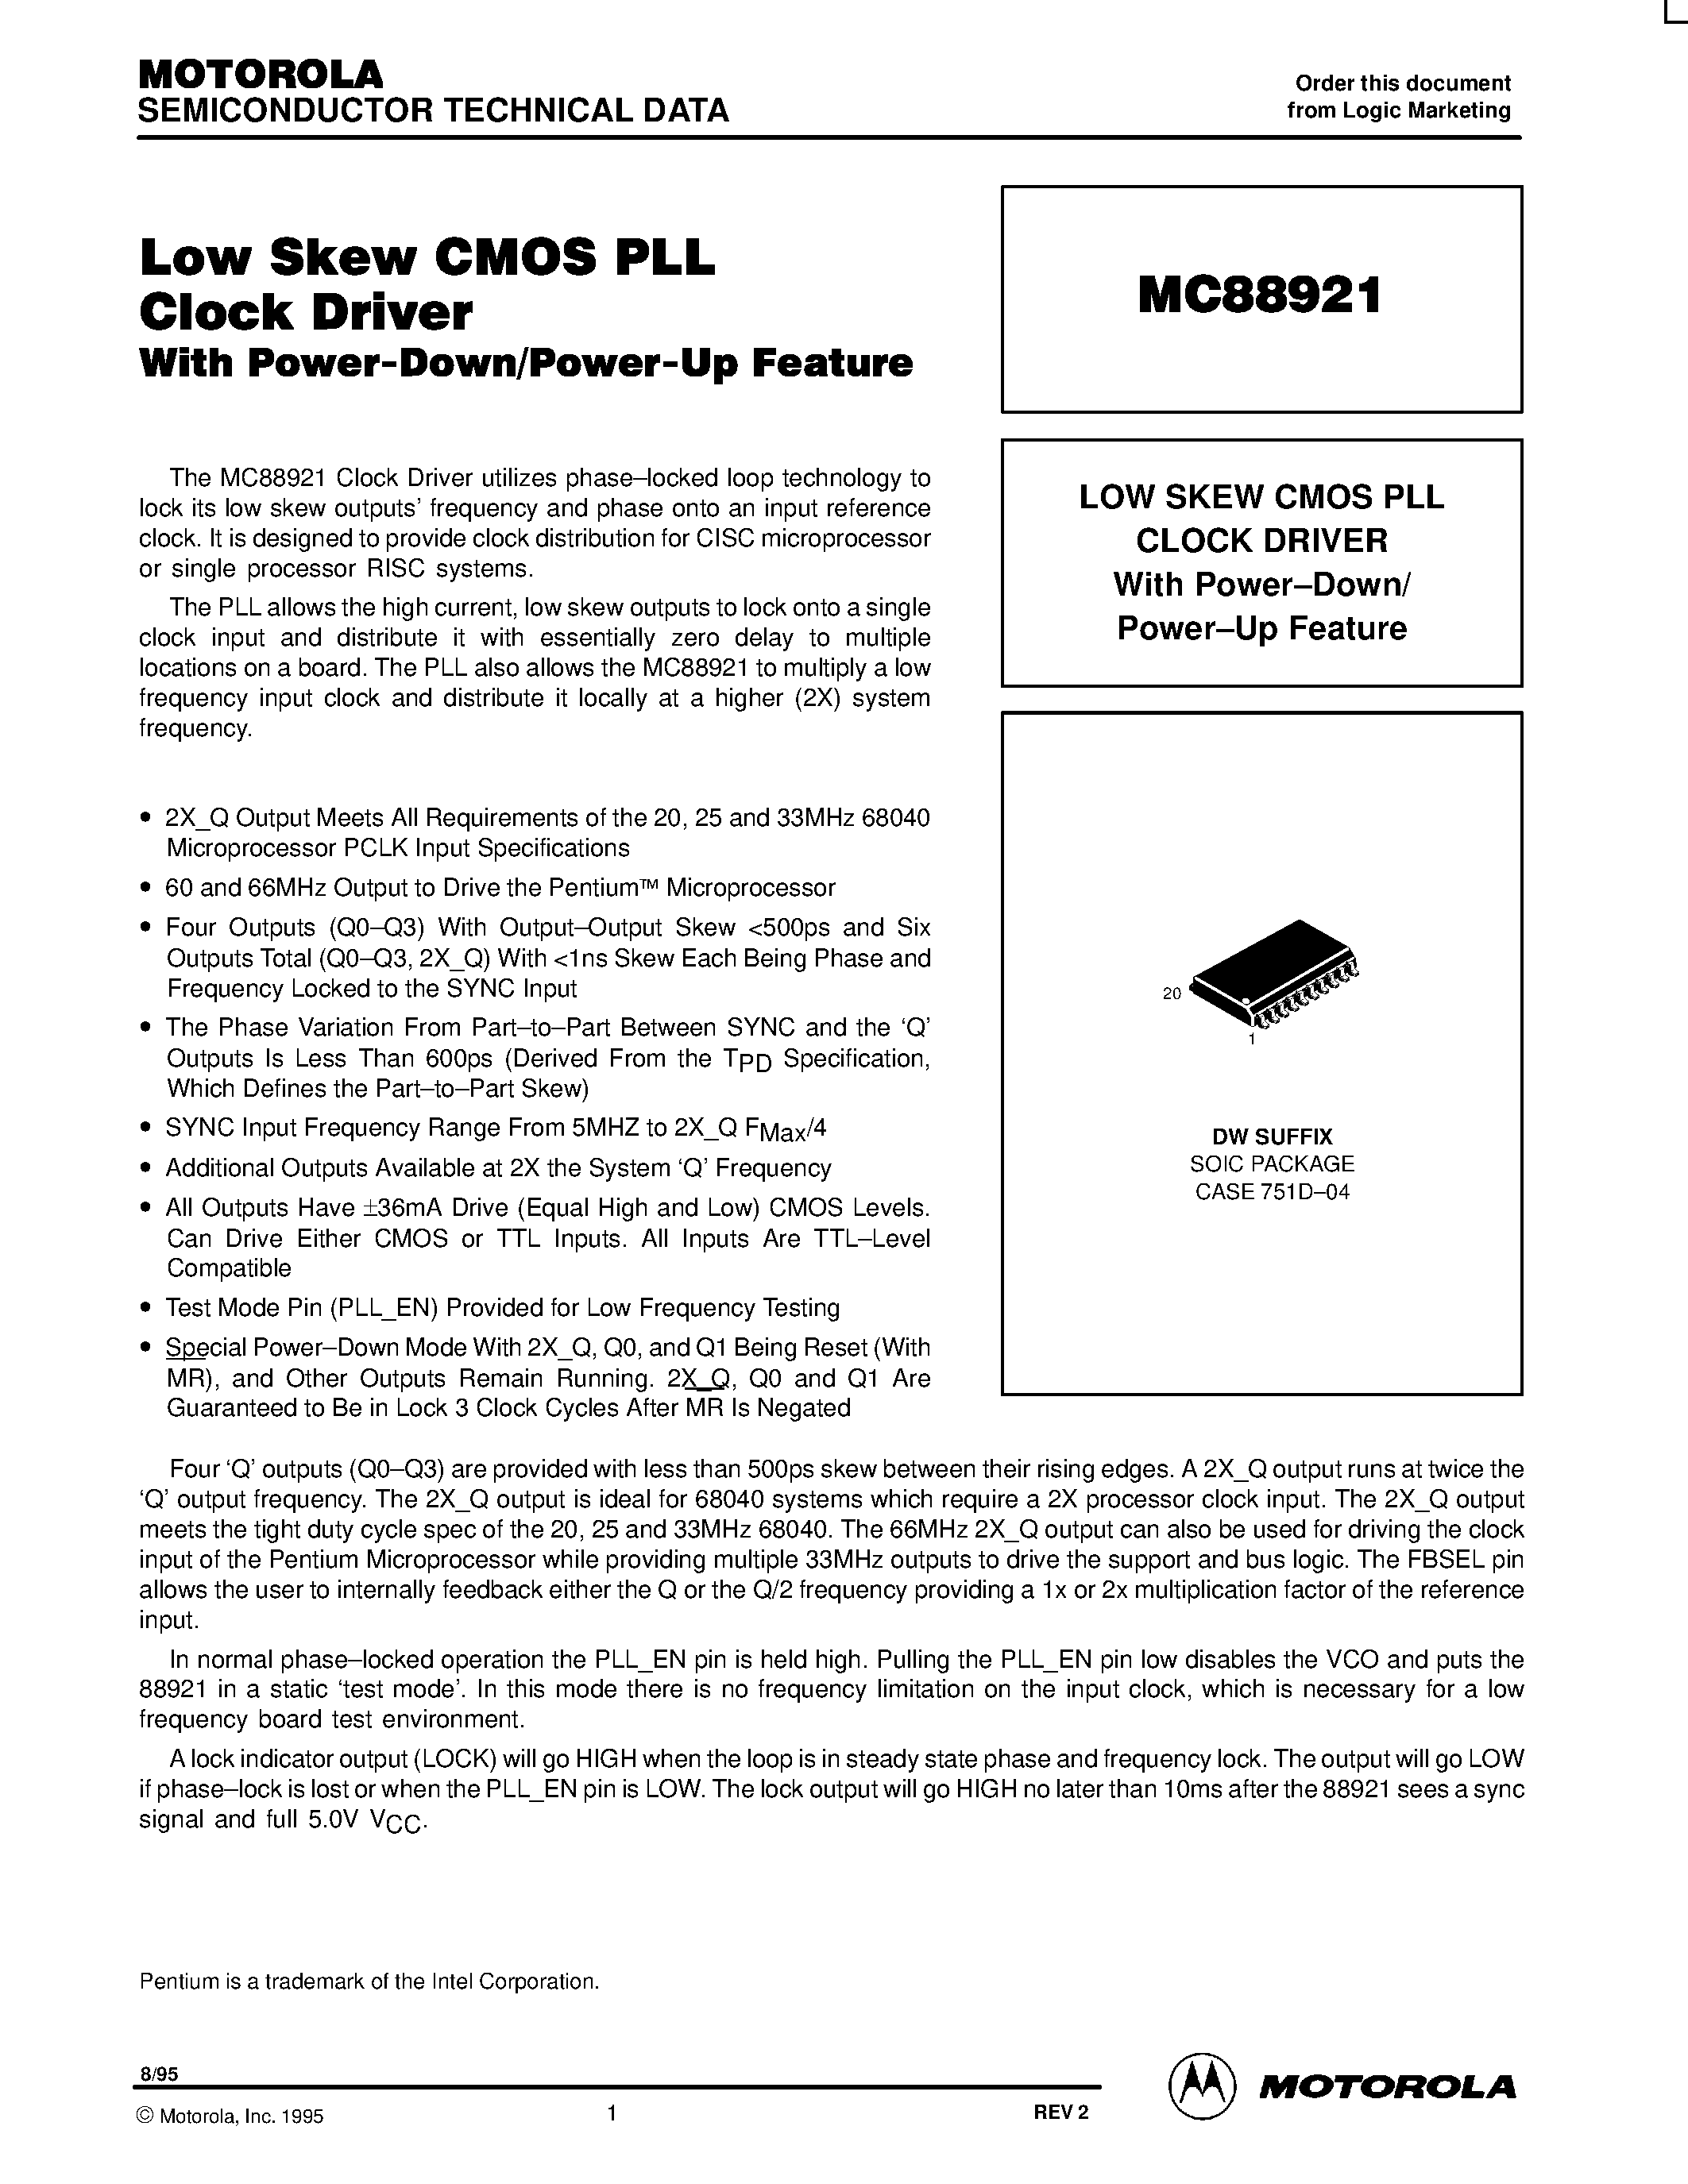 Datasheet MC88921DW - LOW SKEW CMOS PLL CLOCK DRIVER With Power-Down/ Power-Up Feature page 1